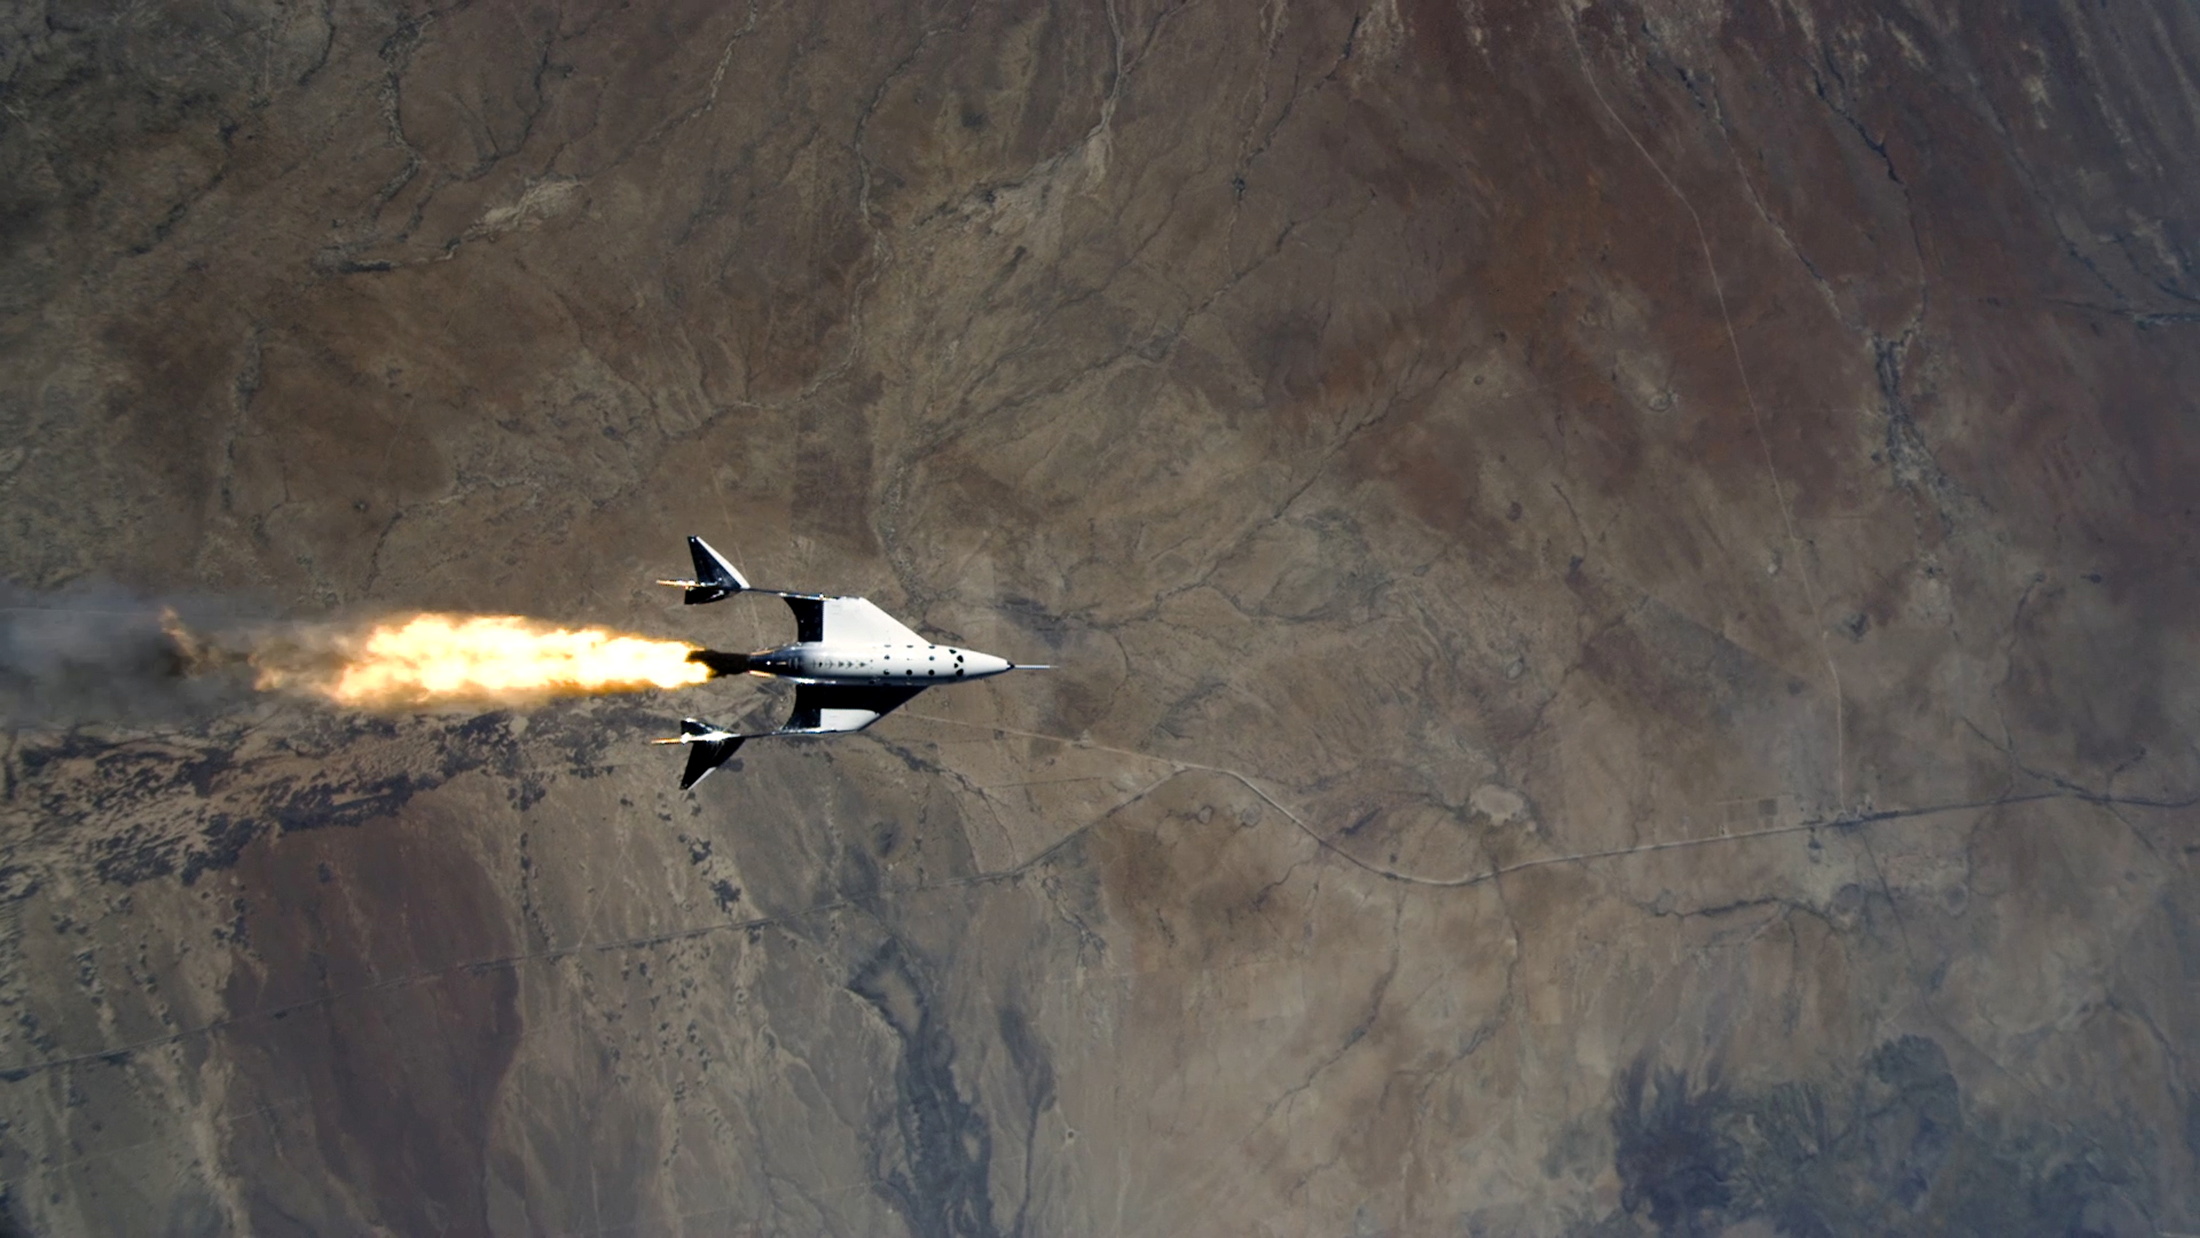 Virgin Galactic's VSS Unity, piloted by CJ Sturckow and Dave Mackay, starts its engines after release from its mothership, VMS Eve, on the way to its first spaceflight after launch from Spaceport America, New Mexico, U.S. May 22, 2021 in a still image from video. Virgin Galactic/Handout via REUTERS.